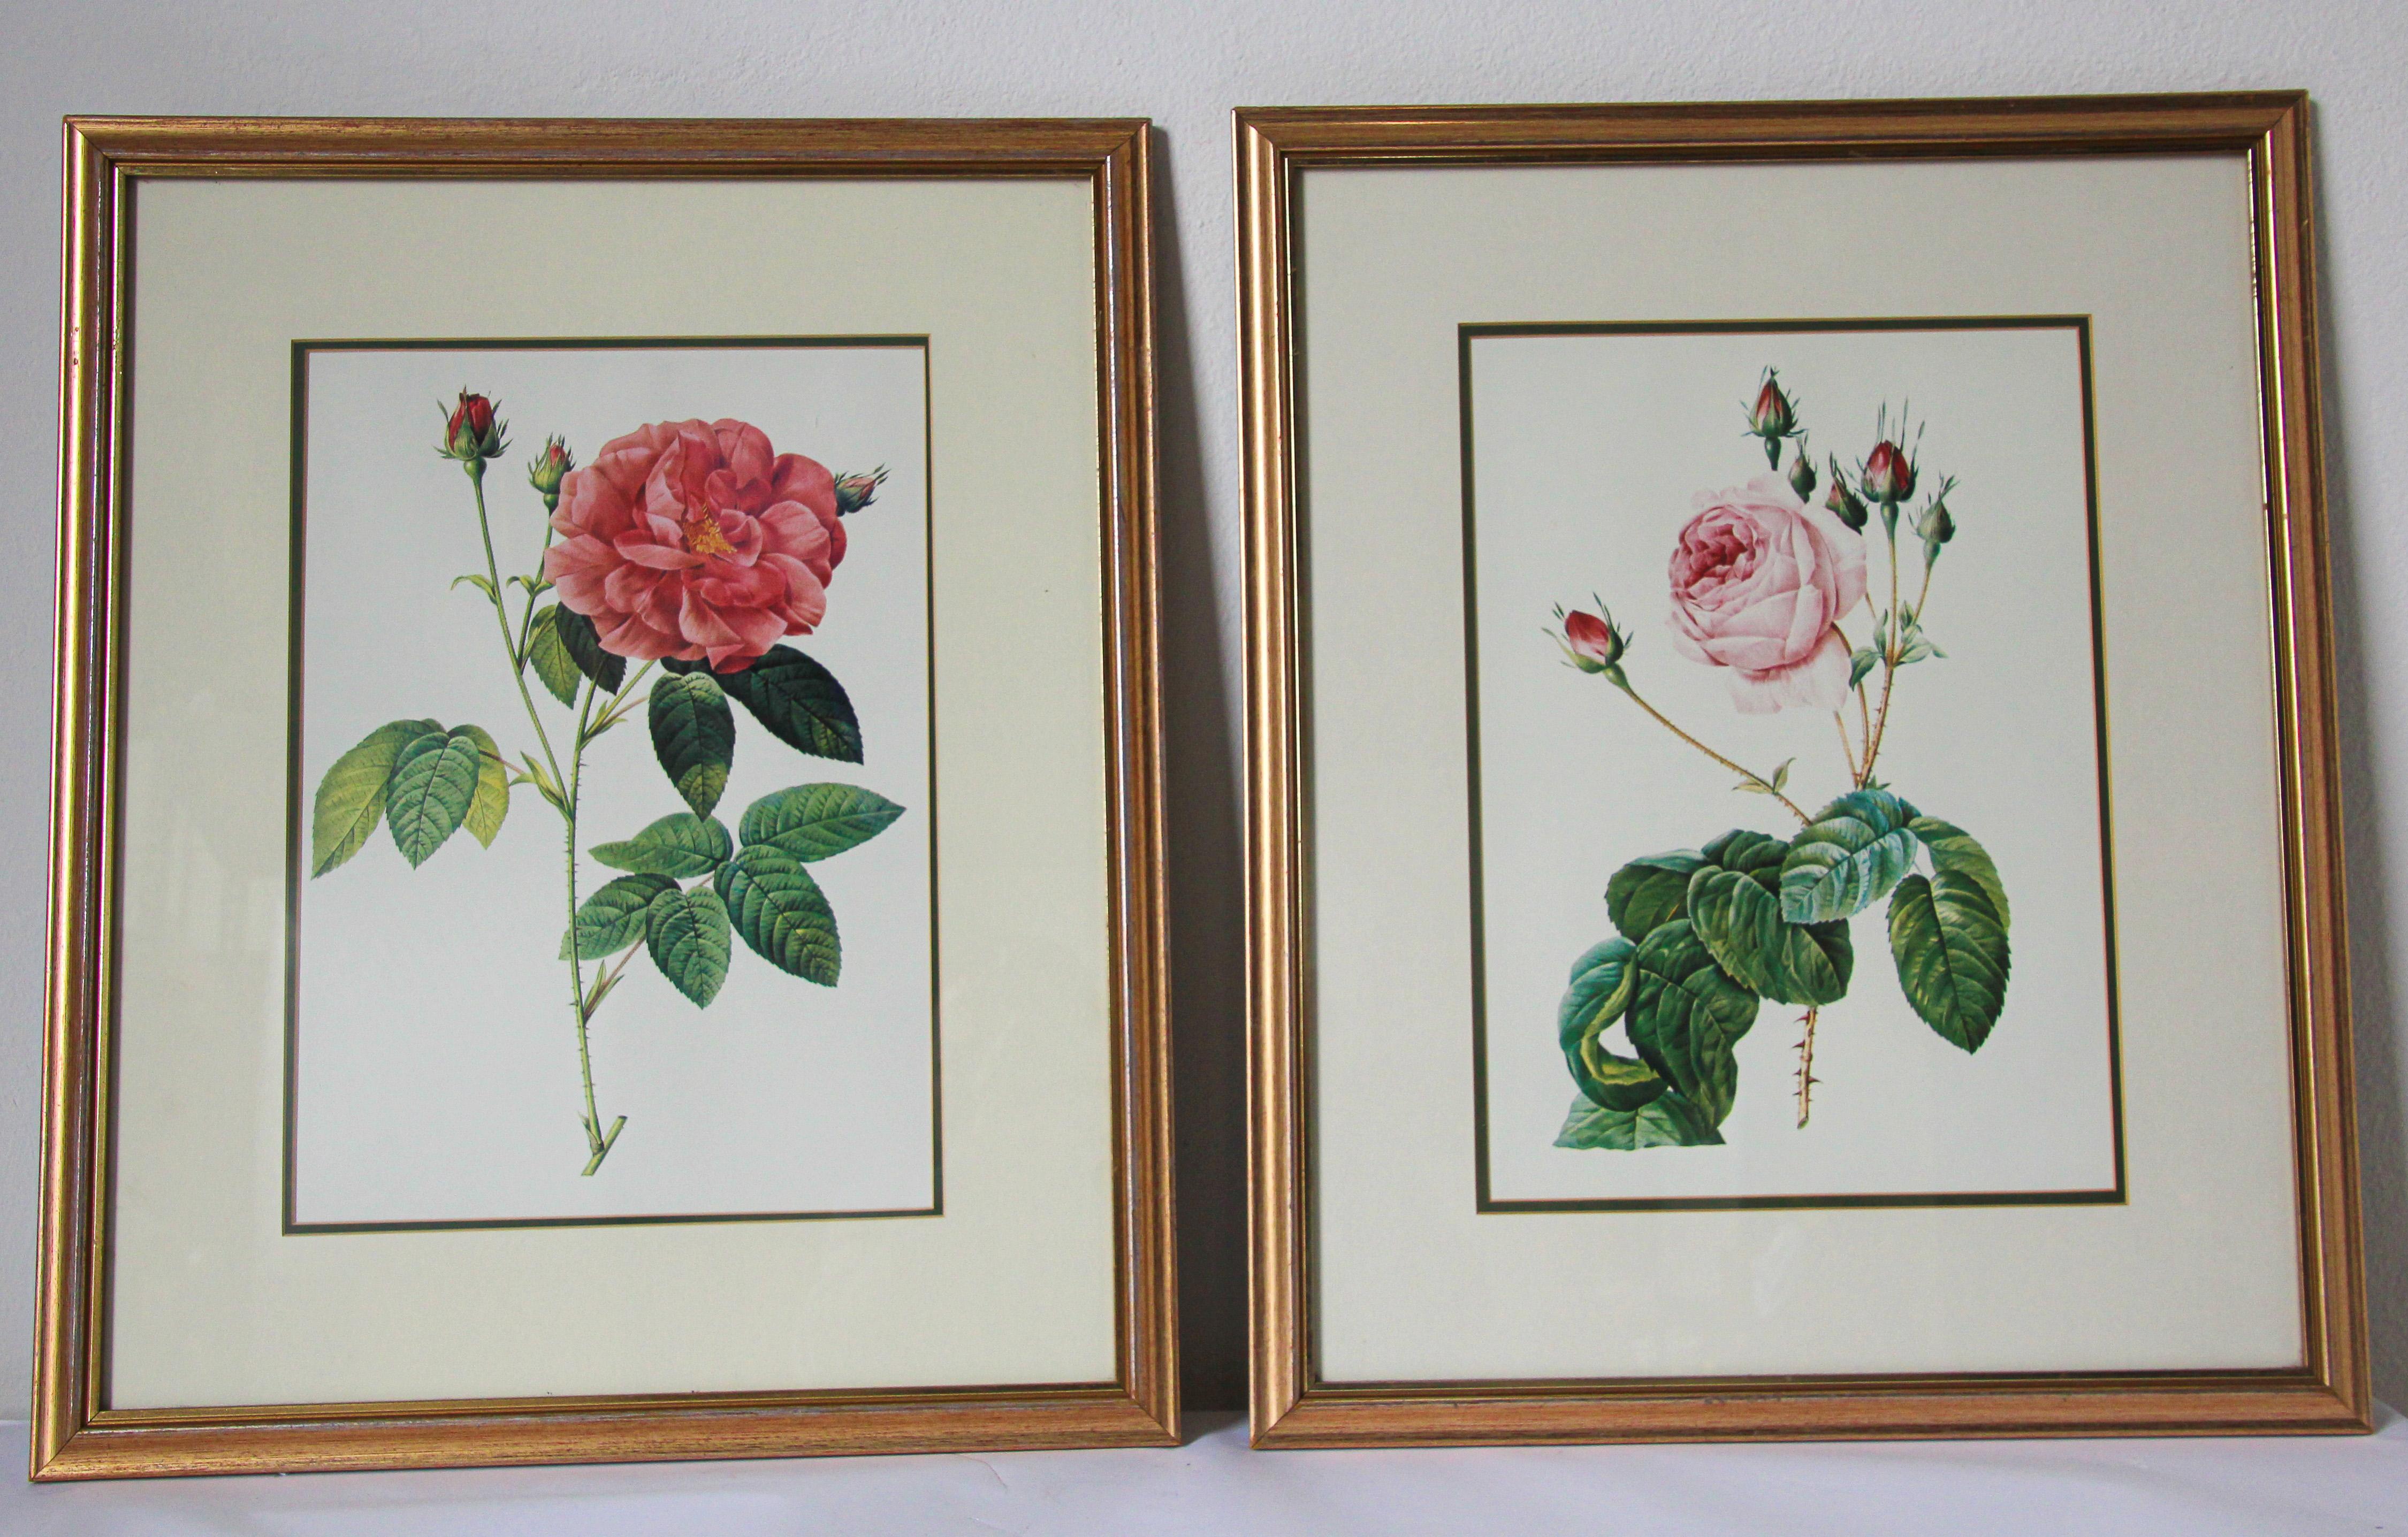 Pair of Botanical rose prints in a gilt frame.
Set of two framed rose prints - Redoute Ariel Press 1988 Printed in England.
